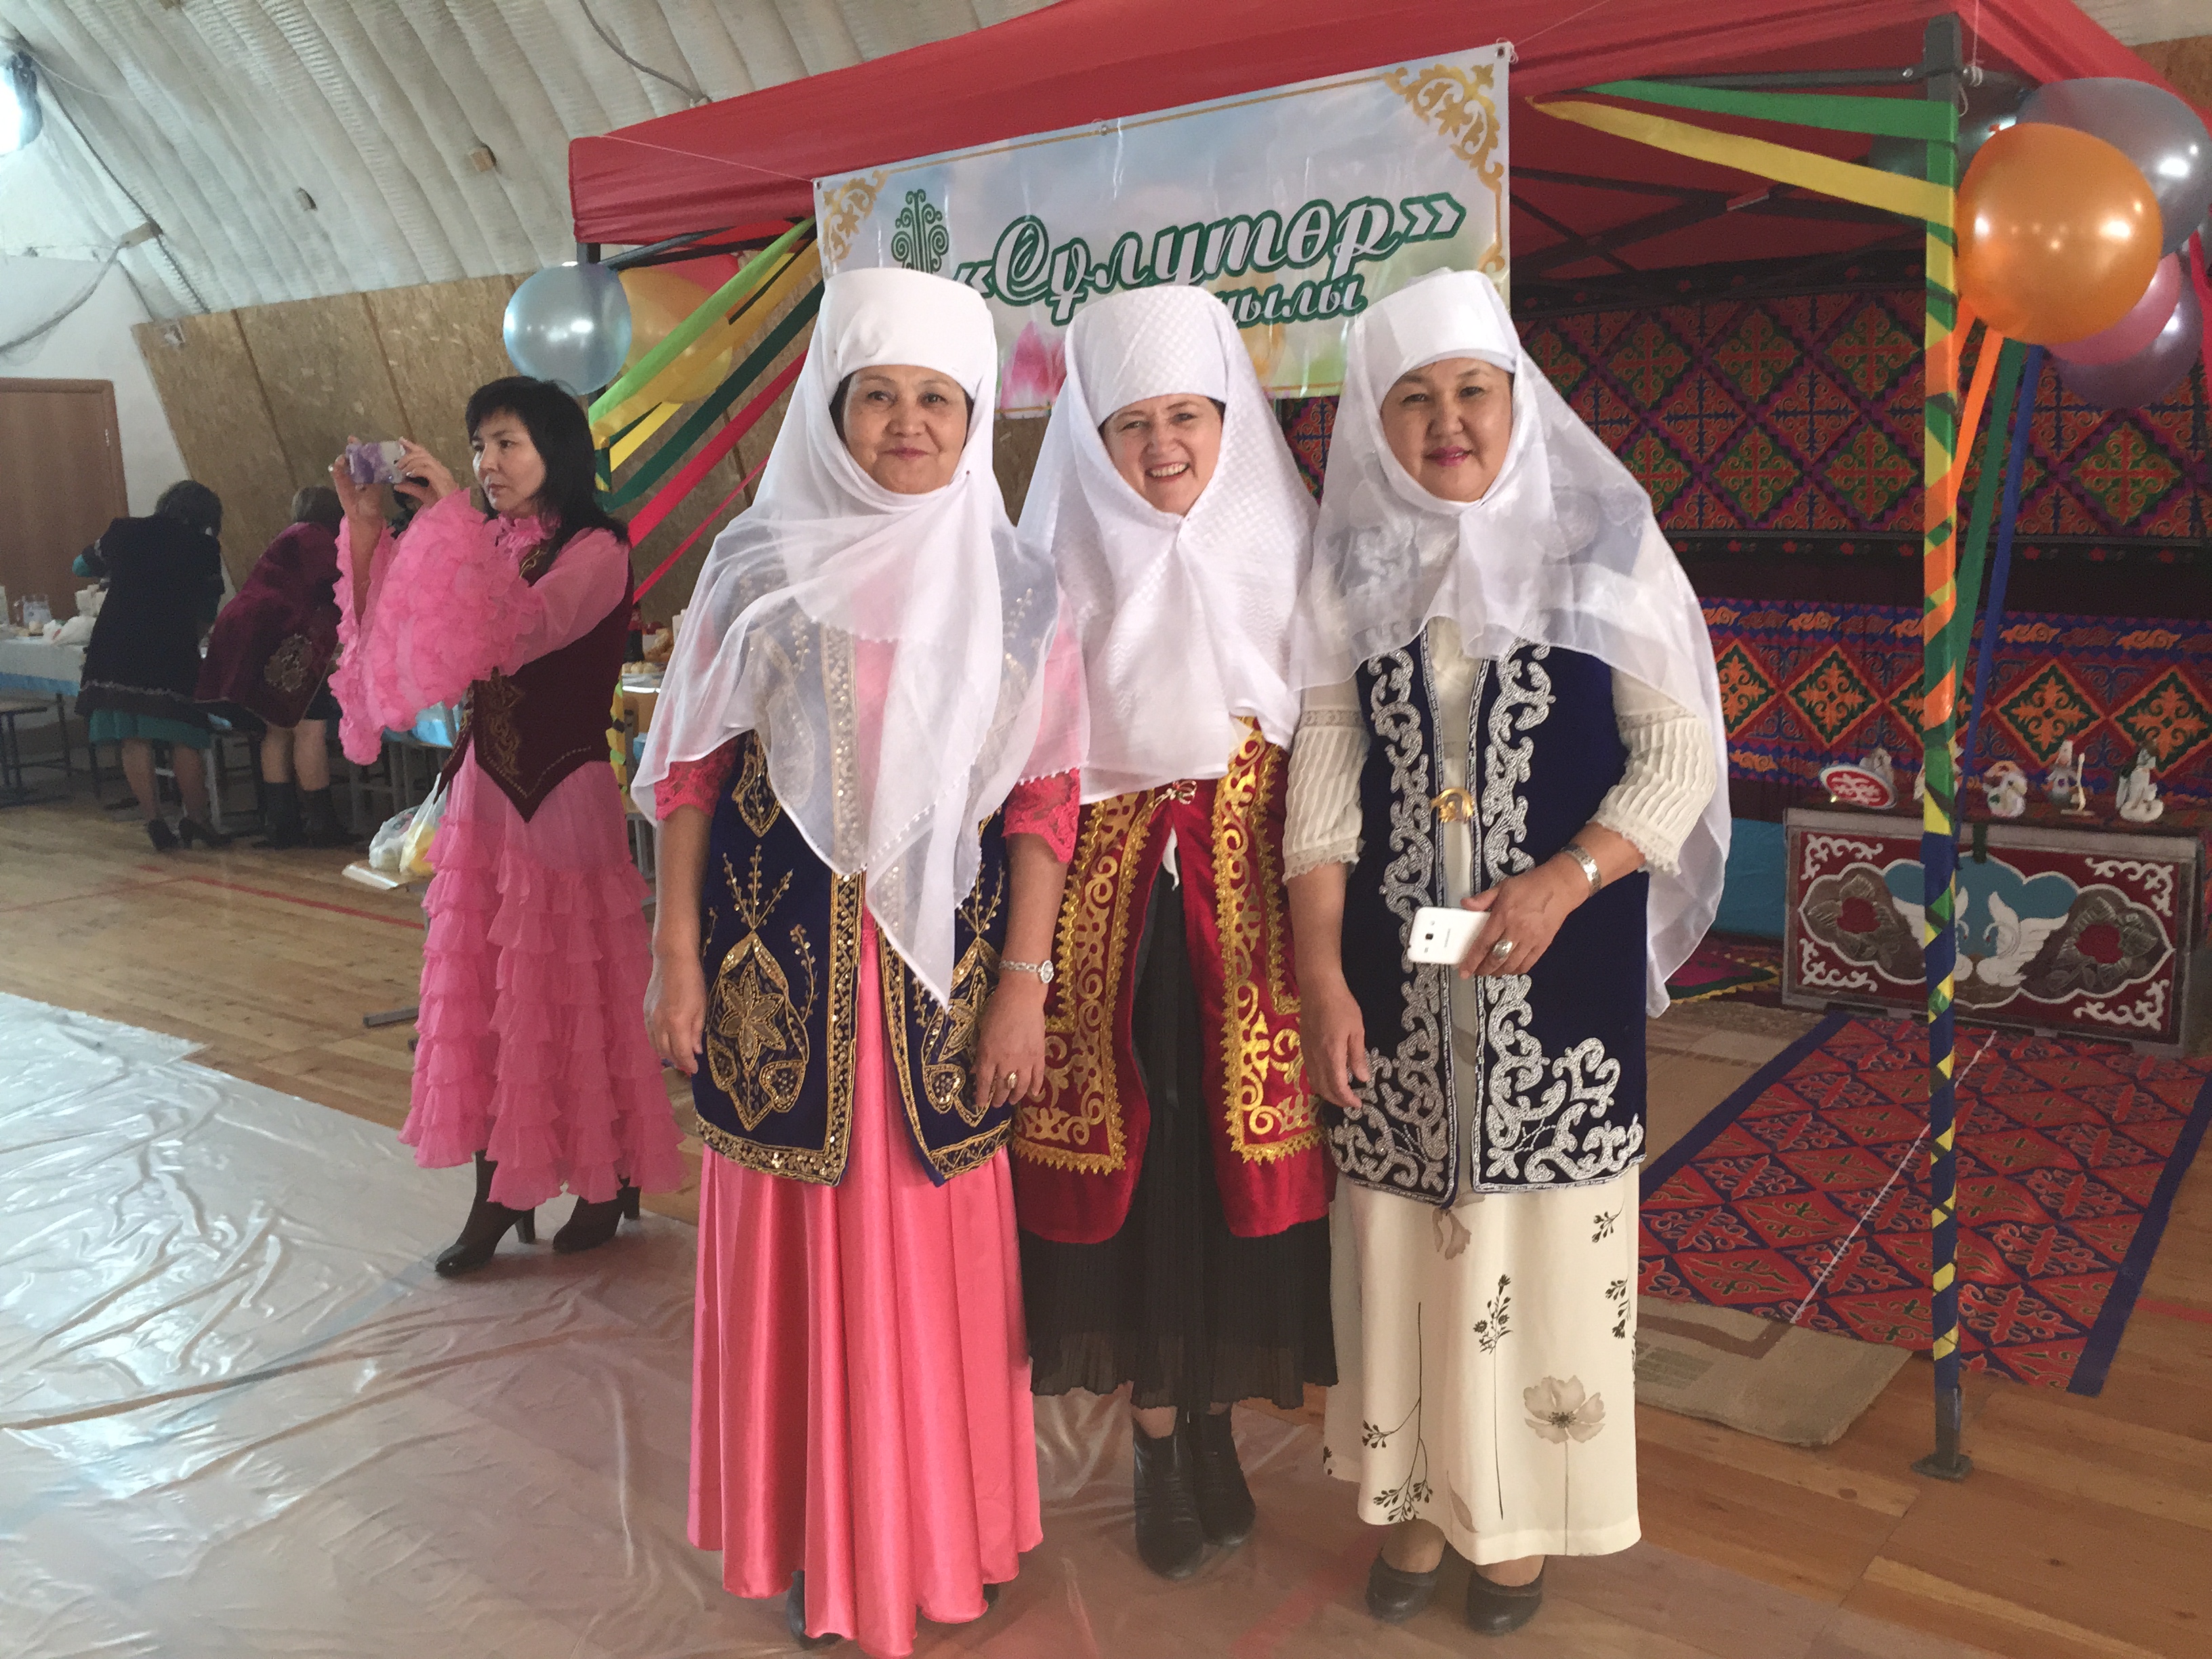 Working as an EFL teacher in Kazakhstan you are embraced by the locals who welcome you into their culture.